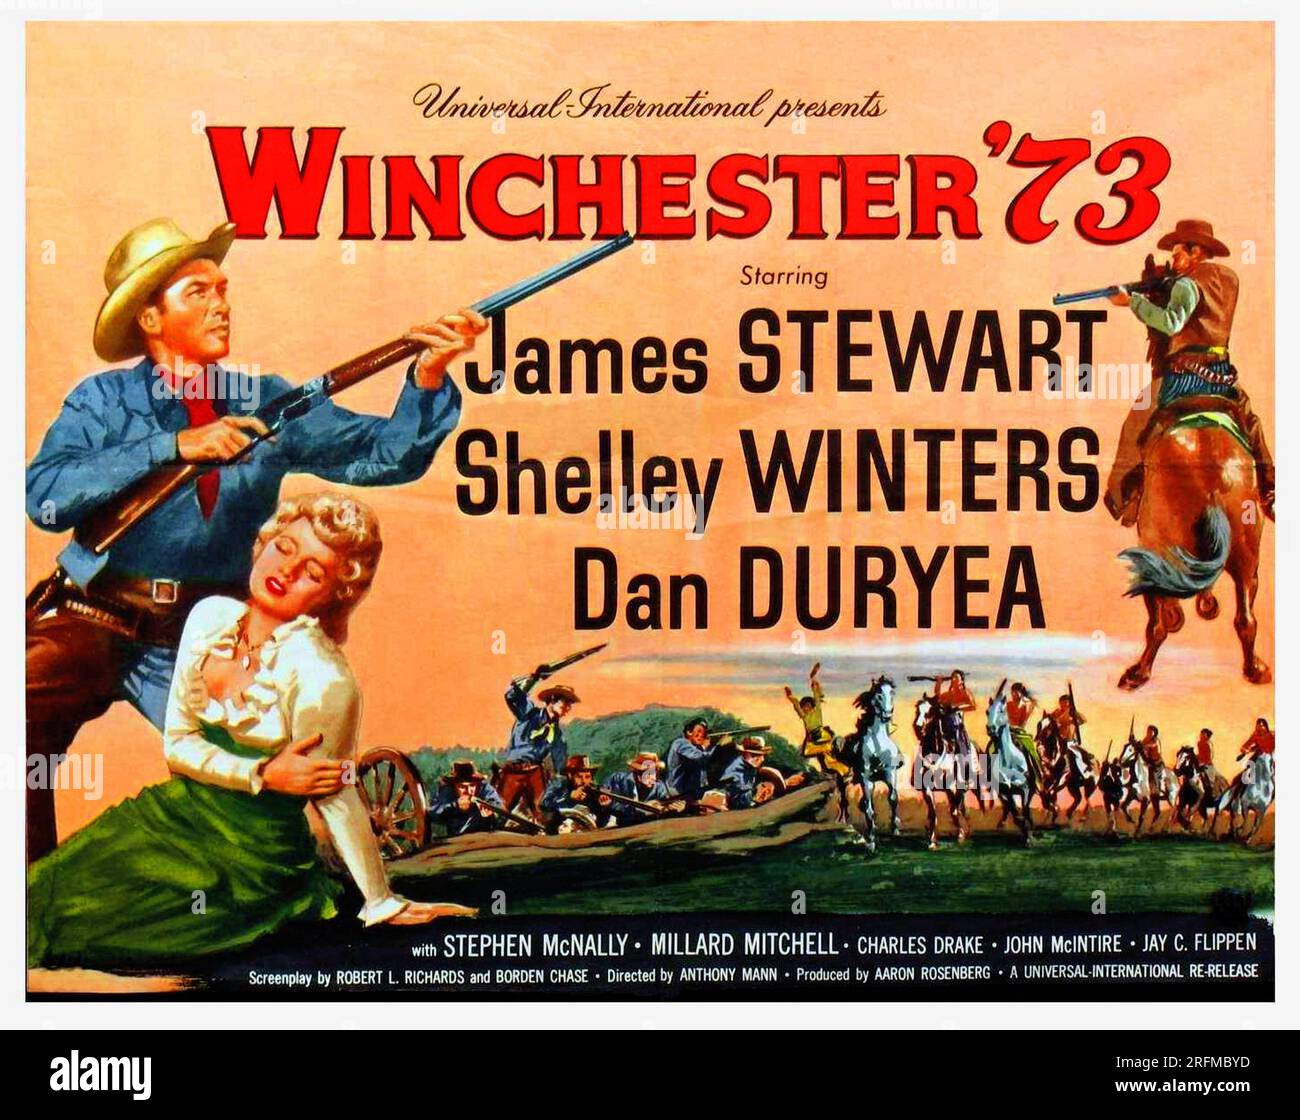 Winchester '73' a 1950 American Western film starring James Stewart, Shelley Winters and Dan Duryea. Stock Photo